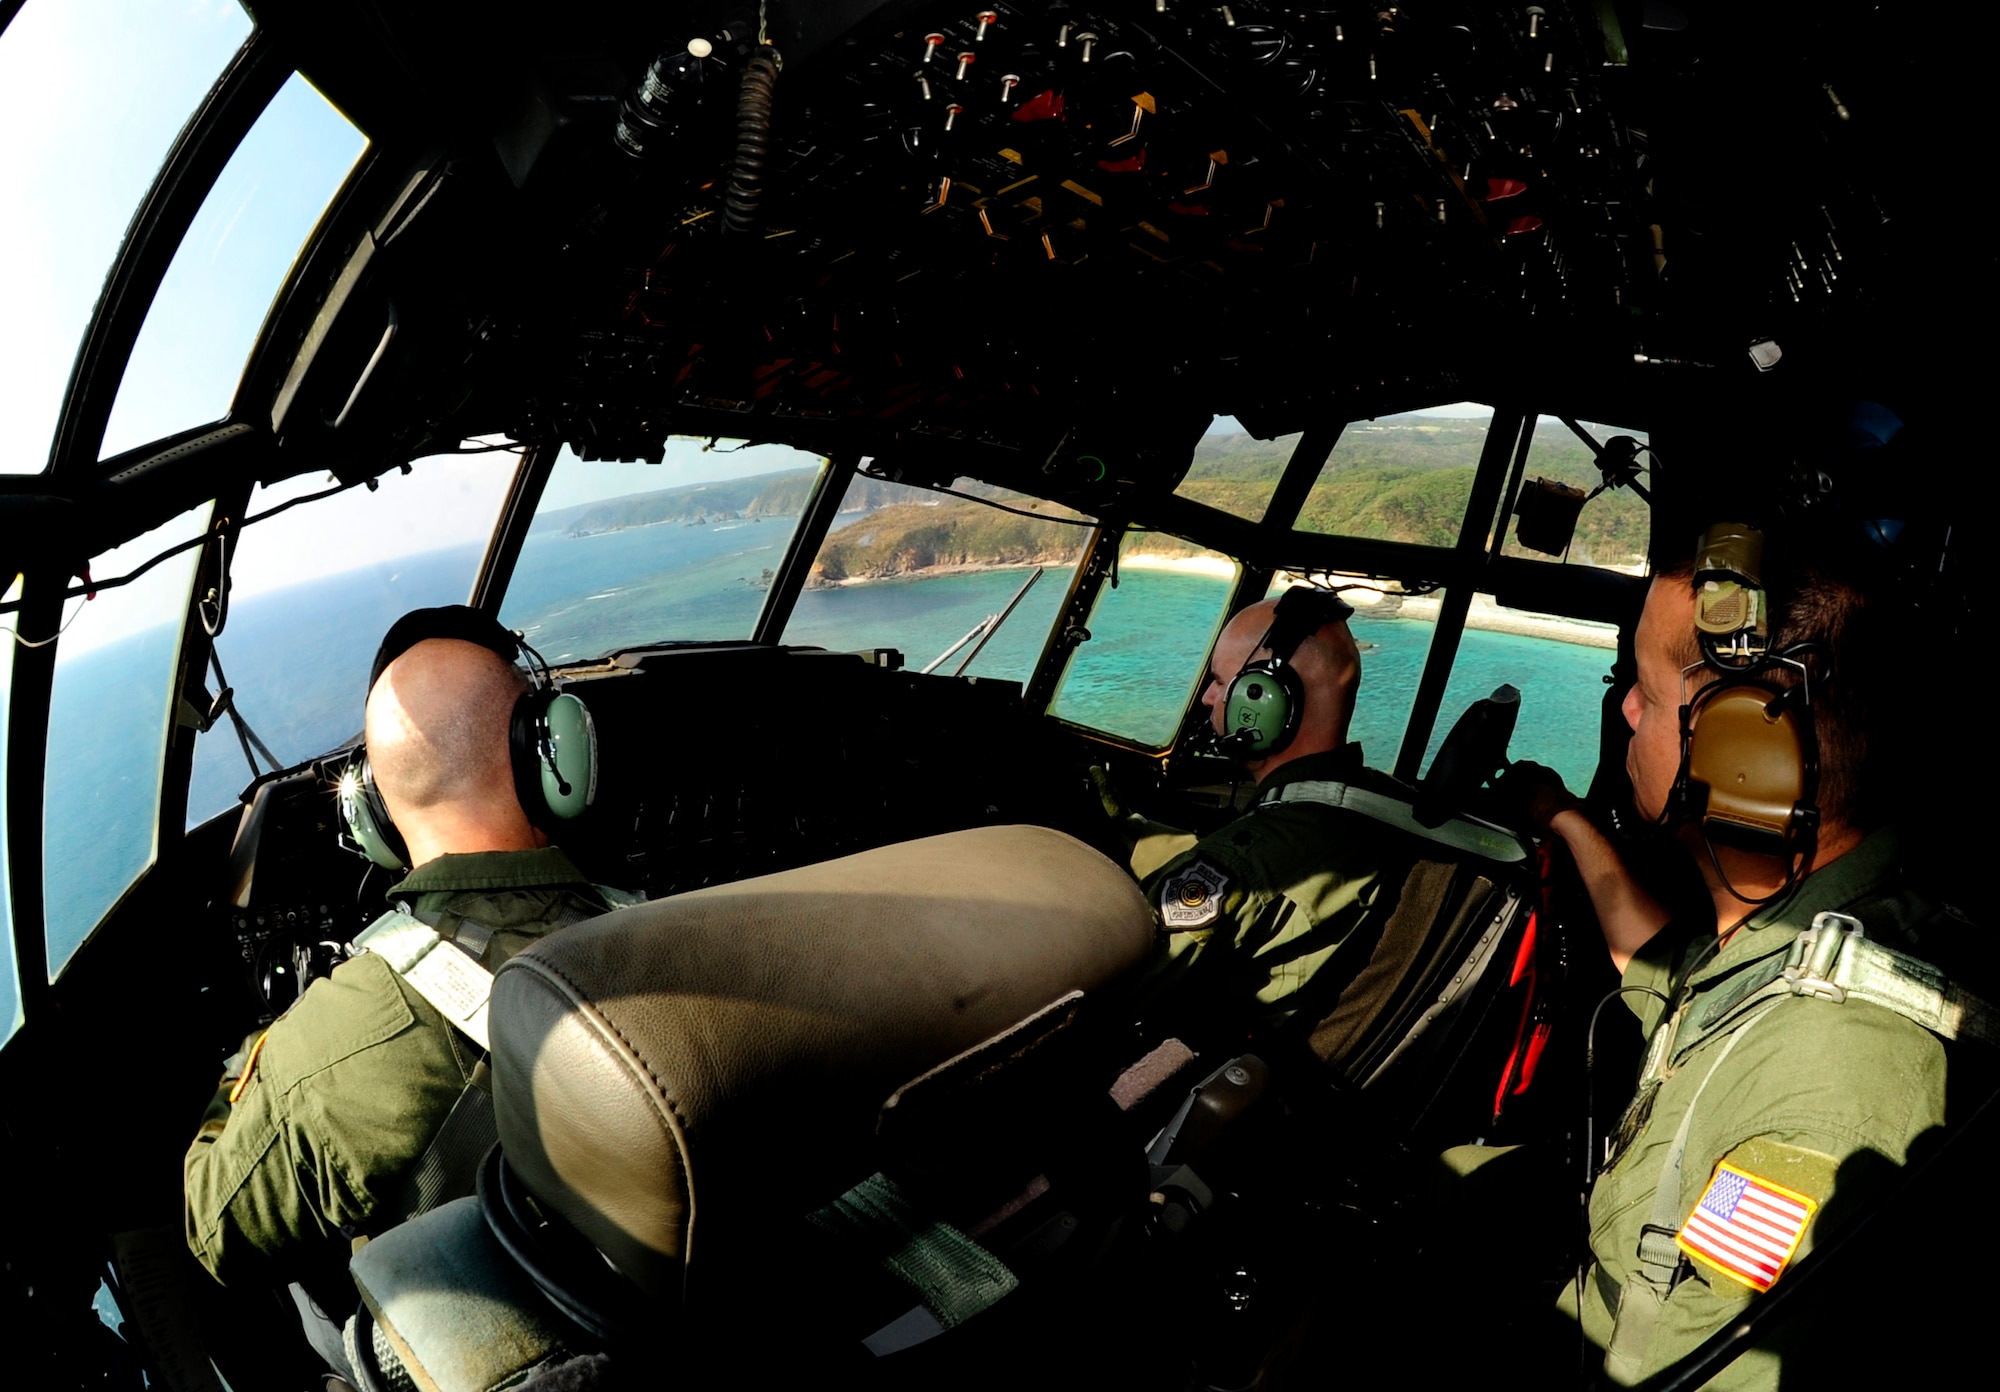 Members from 17th Special Operations Squadron fly an MC-130P Combat Shadow around the coast of Okinawa, Japan, Oct. 16, 2014 during a four-ship formation. All Pacific-based MC-130P Combat Shadow aircraft will be retired over the next year and replaced with the MC-130J Commando II. The flight marked the last time the Combat Shadows will conduct a four-ship formation at Kadena. (U.S. Air Force photo by Airman 1st Class Keith James)